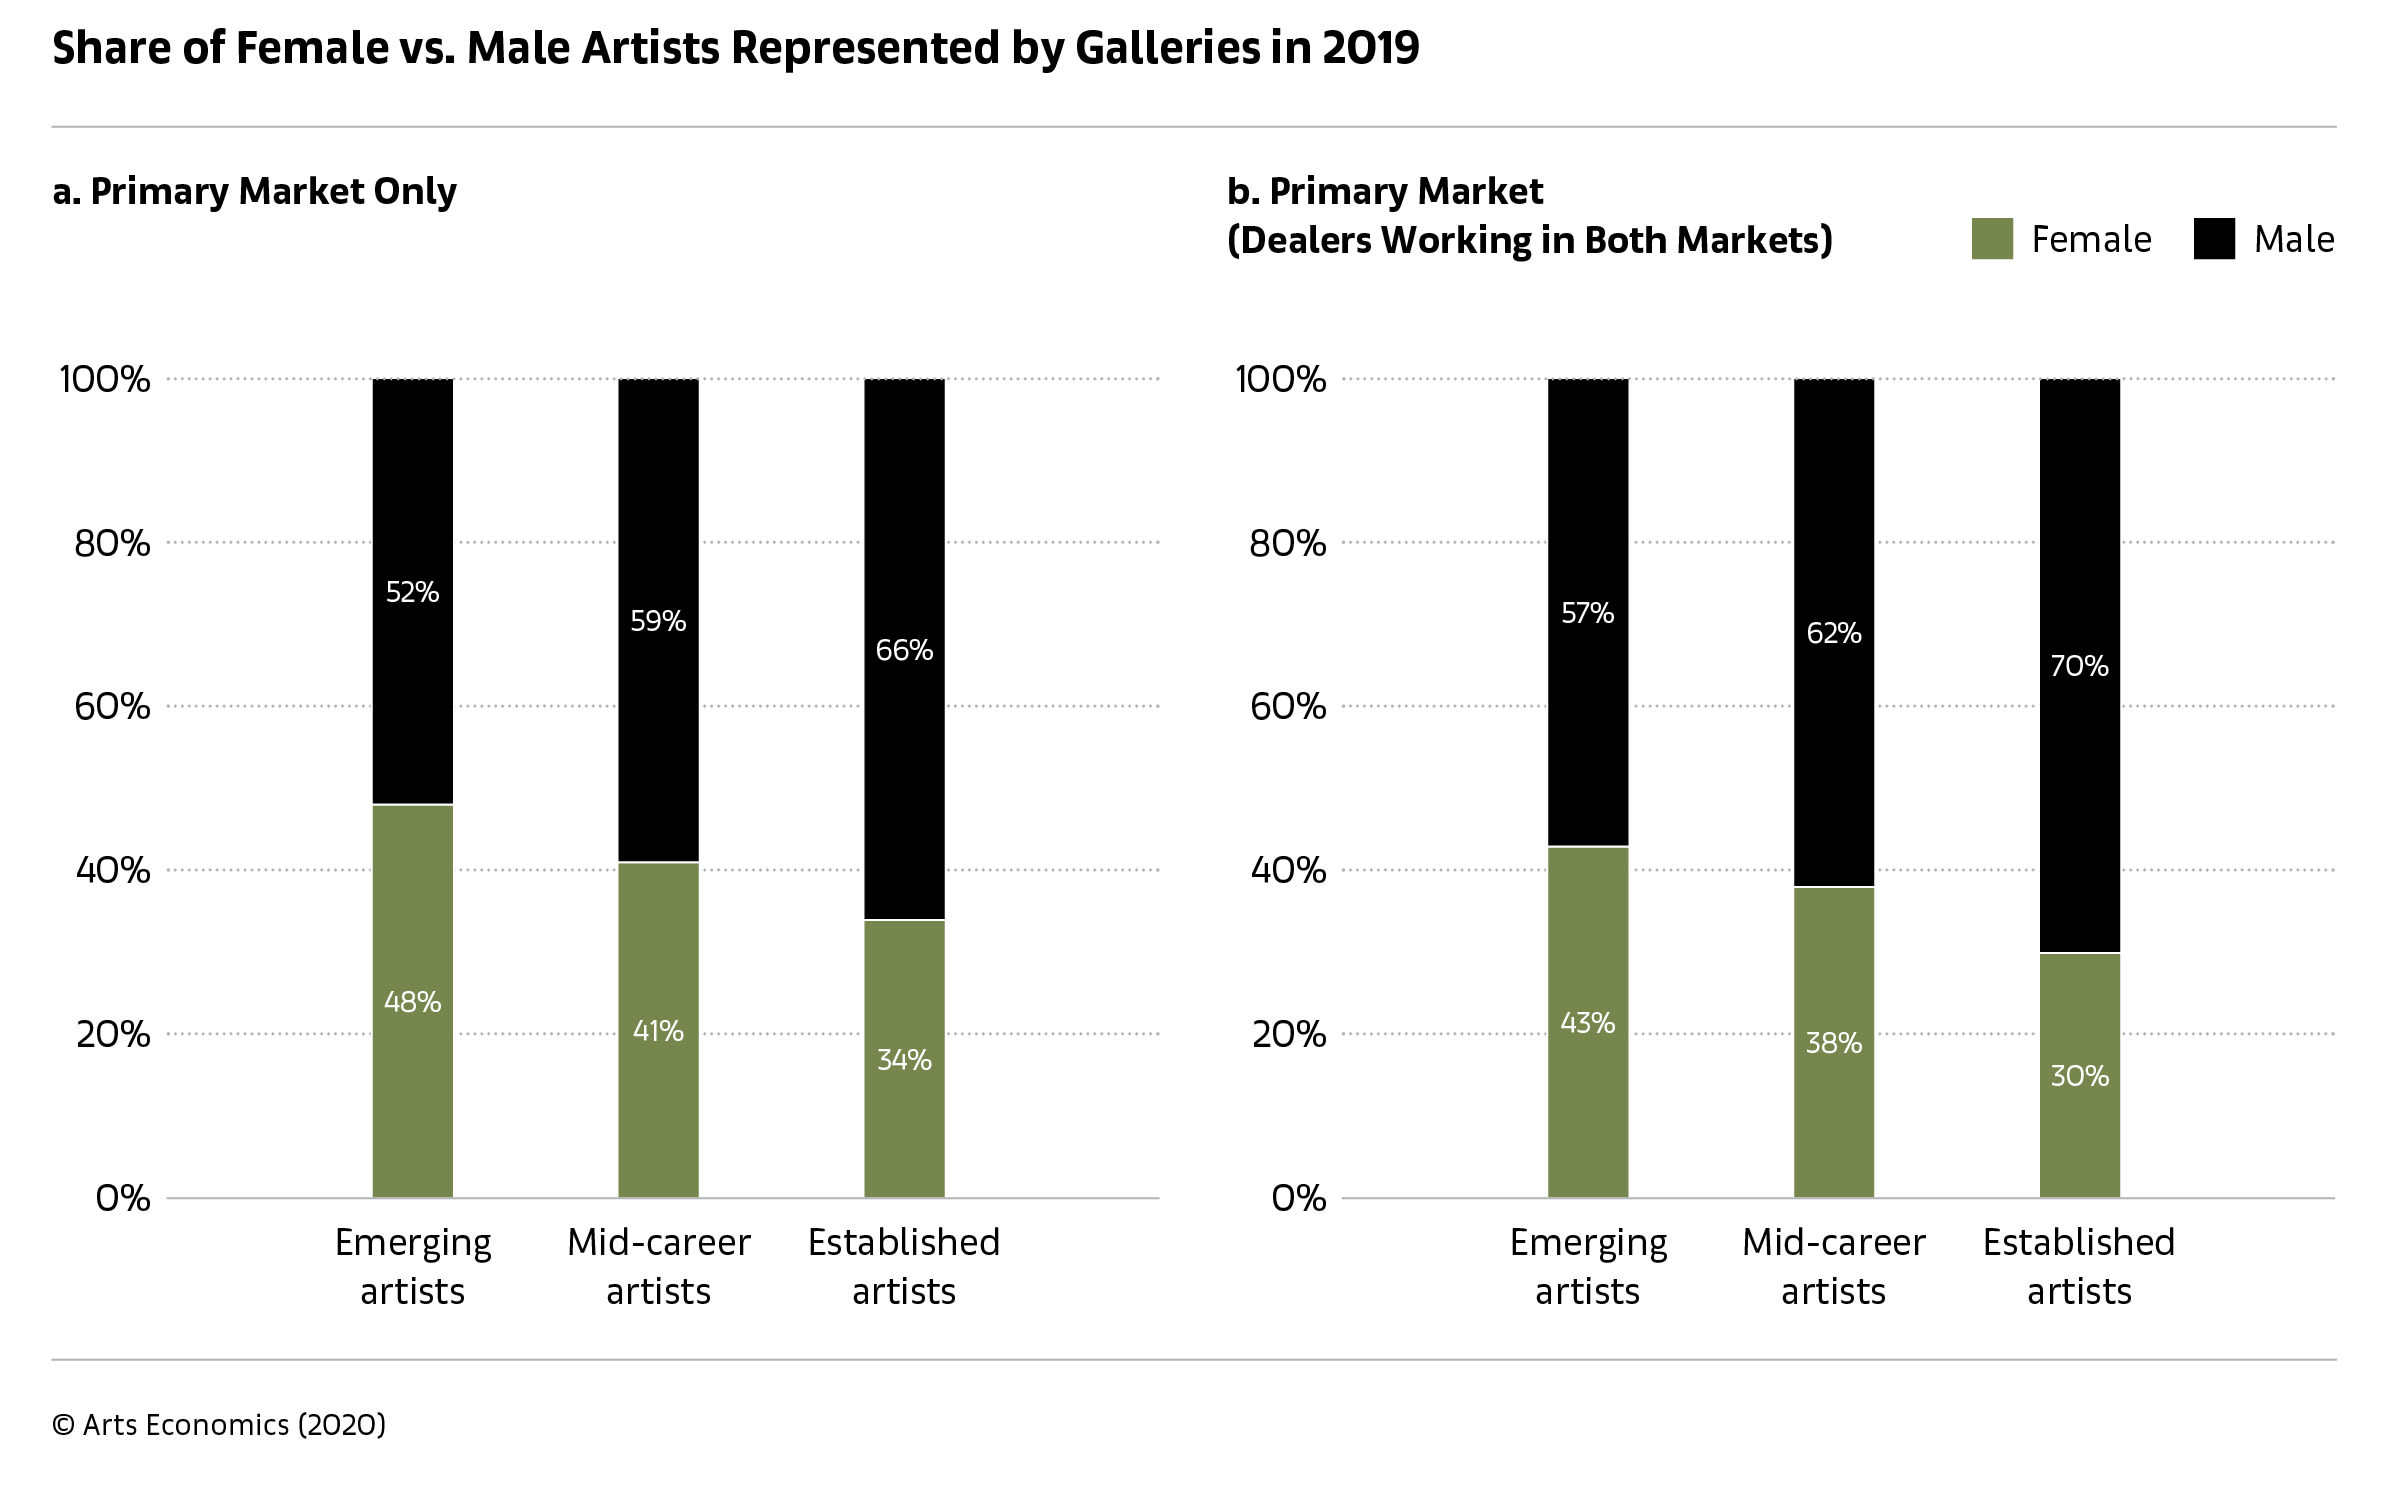 McAndrew’s report documents an uptick of some 8% year-on-year in the female percentage of rosters at primary-market galleries, to a record 44%.